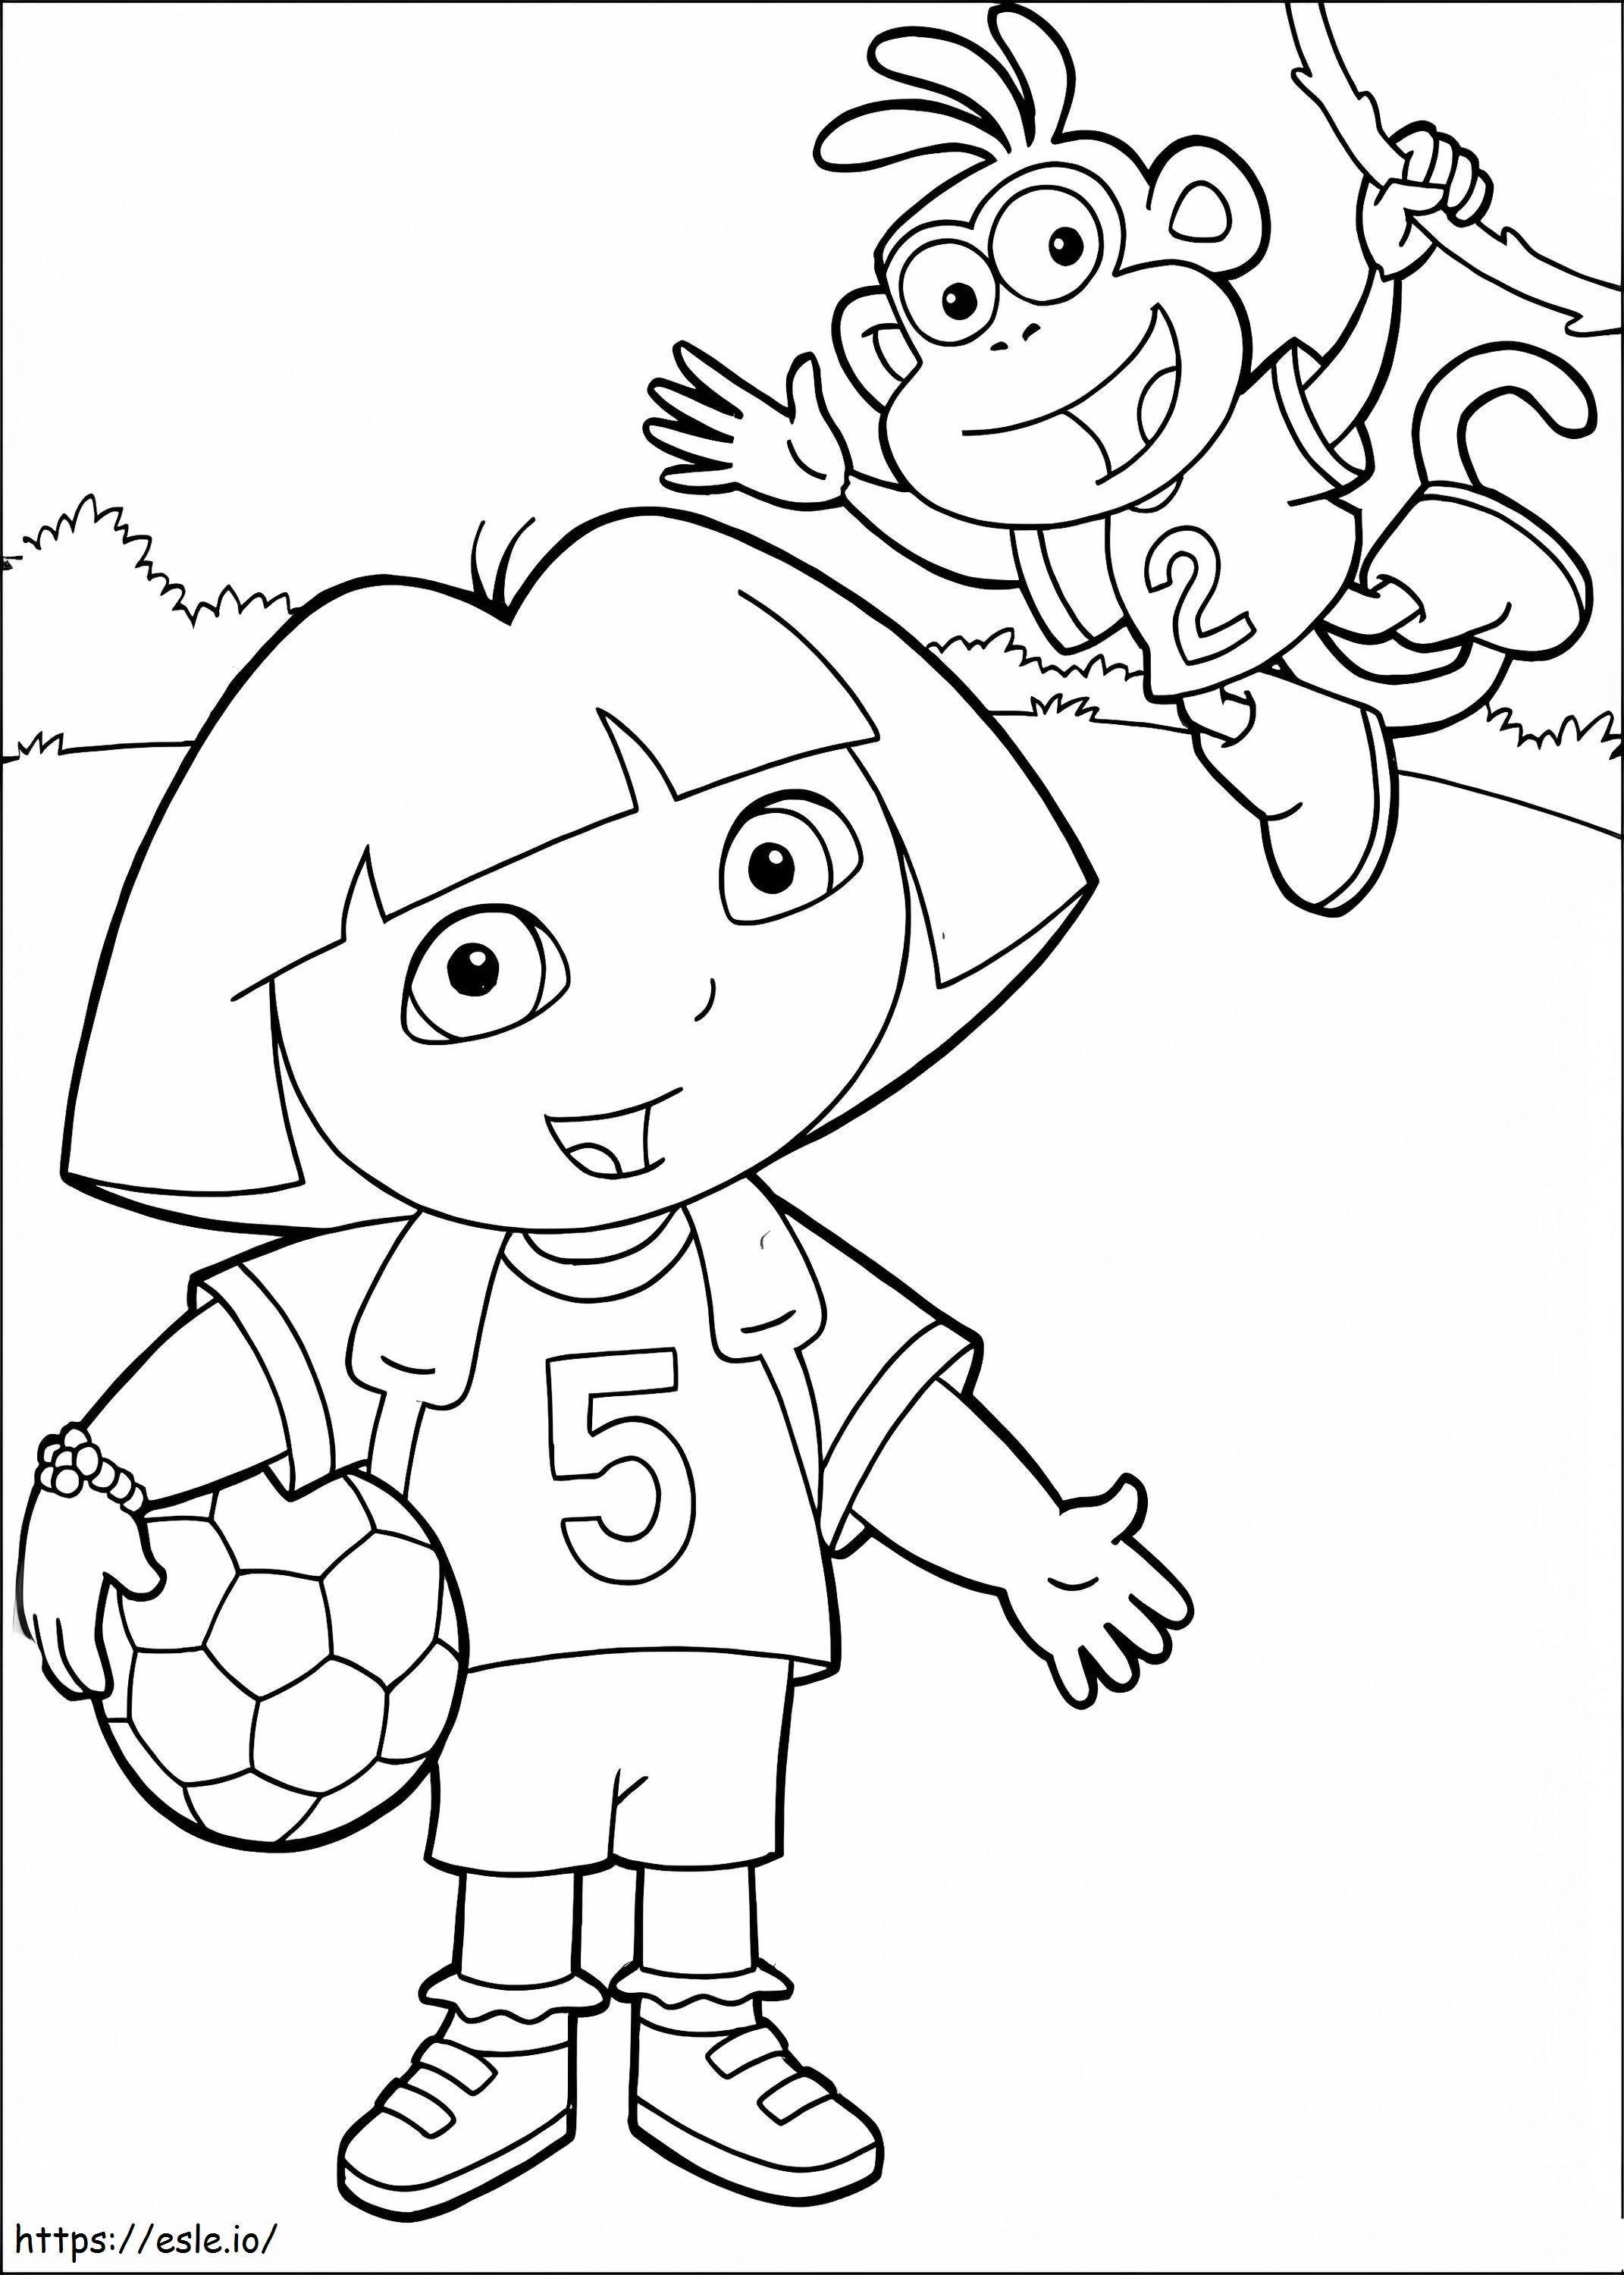 Boots And Dora Playing Soccer coloring page